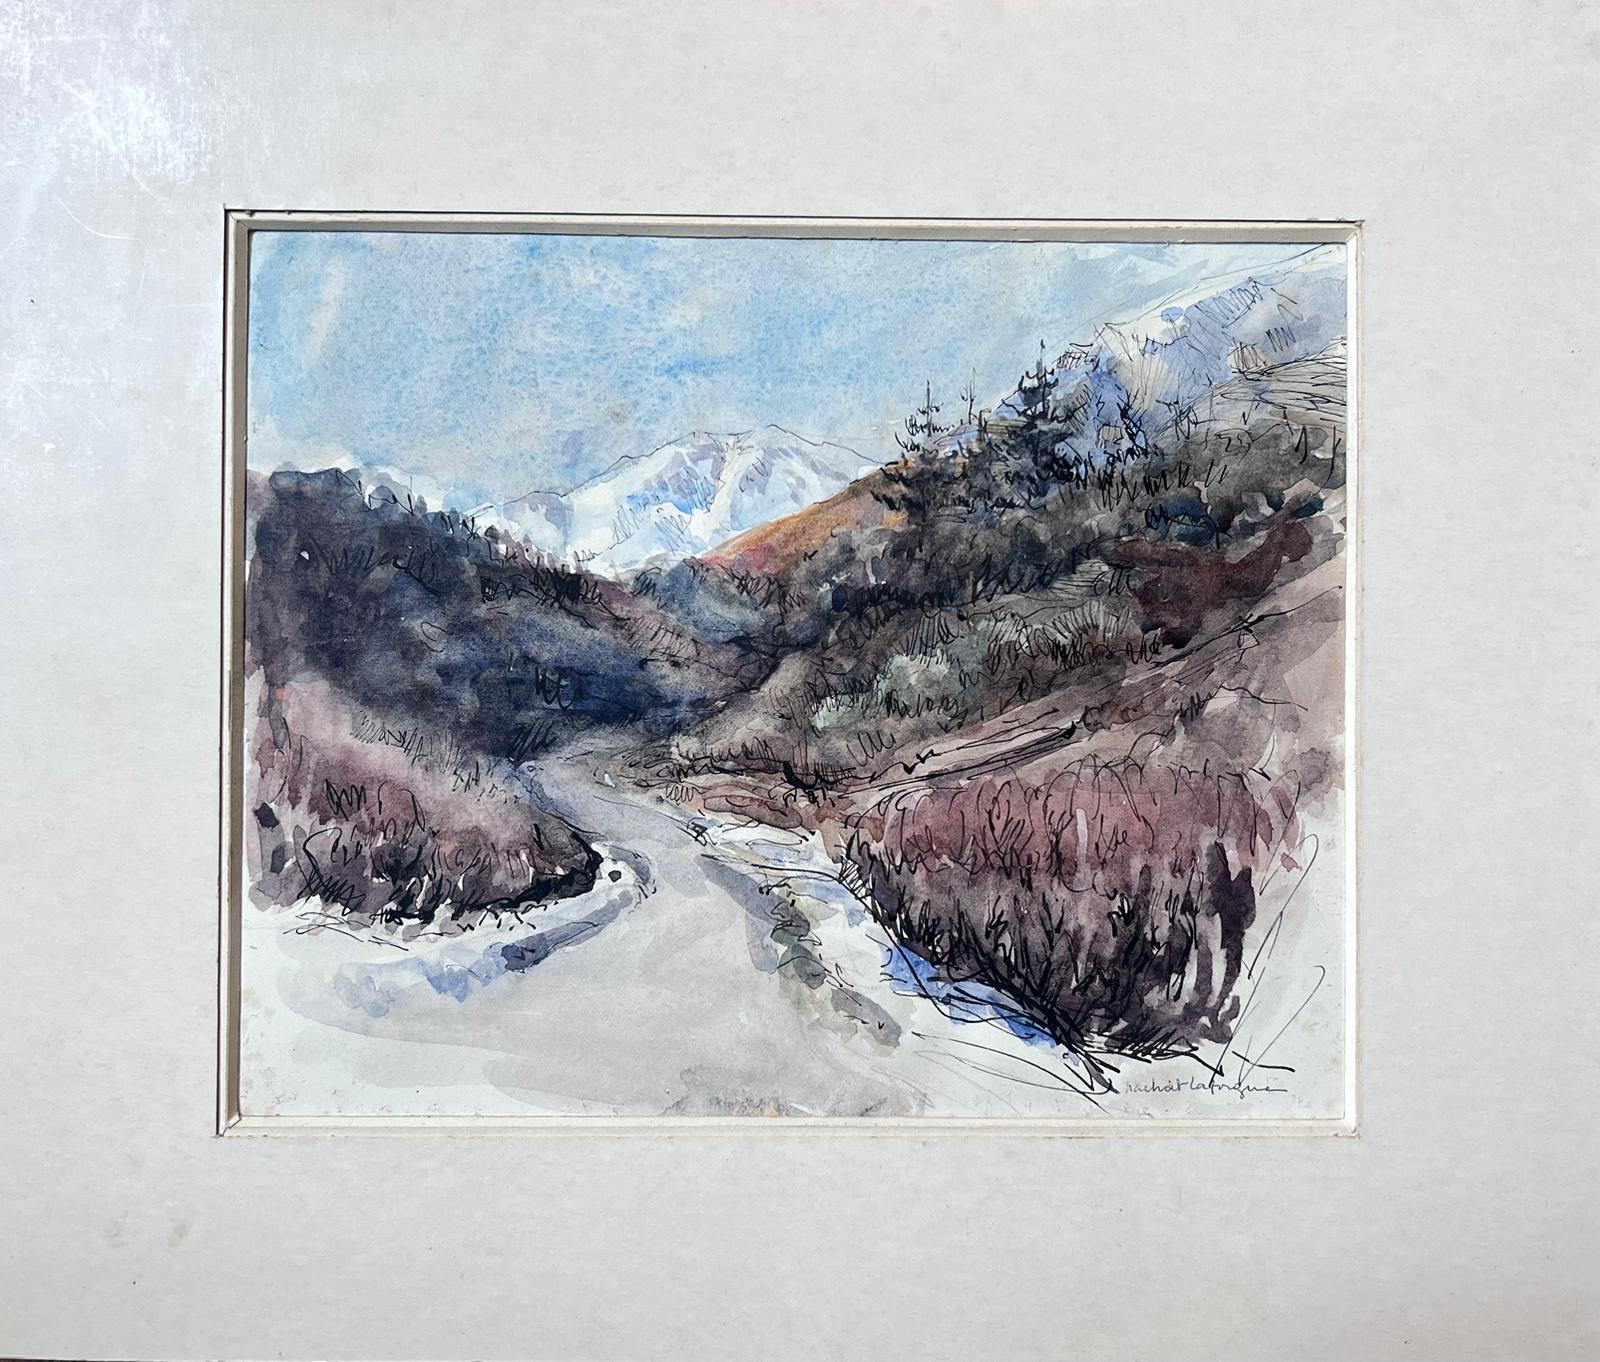 Jean La Forgue (French 1901-1975) signed watercolour on paper, mounted in a card frame
card frame: 12 x 14.5 inches
painting: 8 x 10 inches
provenance: the artists estate, France
condition: very good and sound condition; there are minor age related